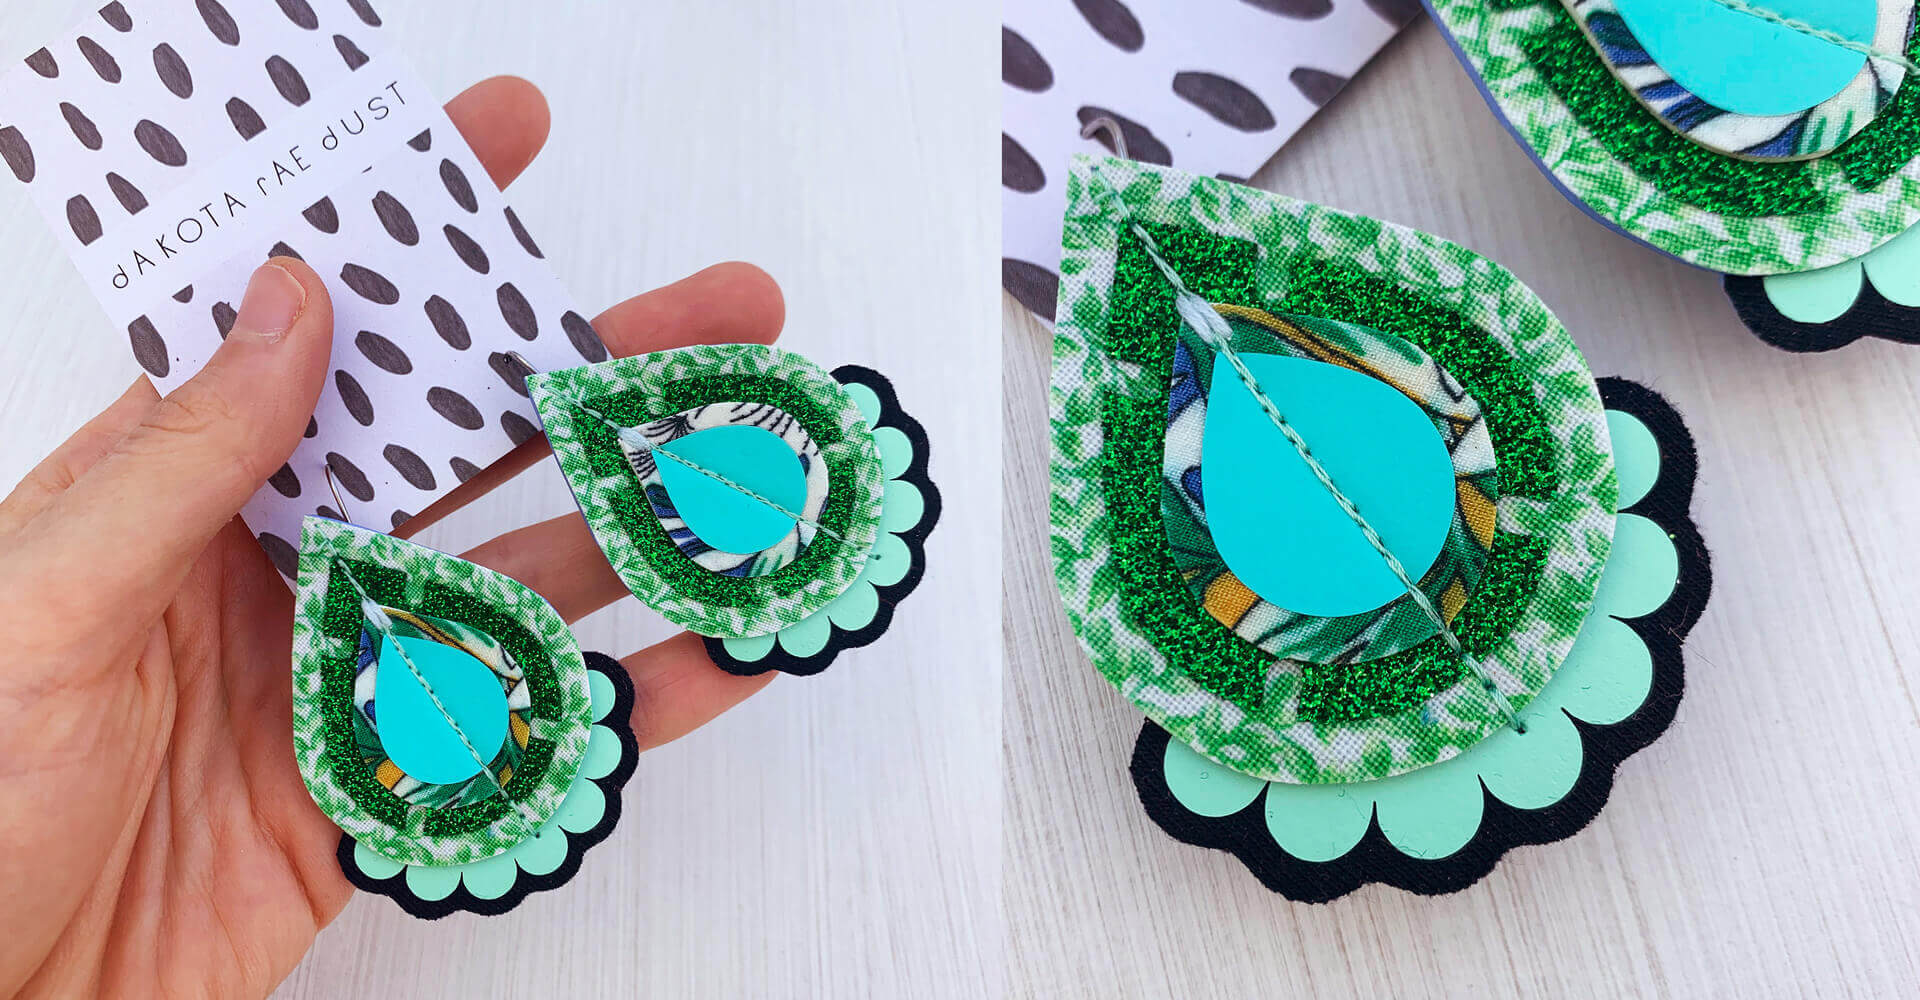 Two photos of a pair of teardrop shaped, green fabric earrings. The image on the left shows the earrings mounted on a patterned, dakota rae dust branded card, held in a woman's hand. The image on teh right is a close of of one of the earrings including details of the row of stitch holding the two vintage floral fabric teardrop shapes in place.